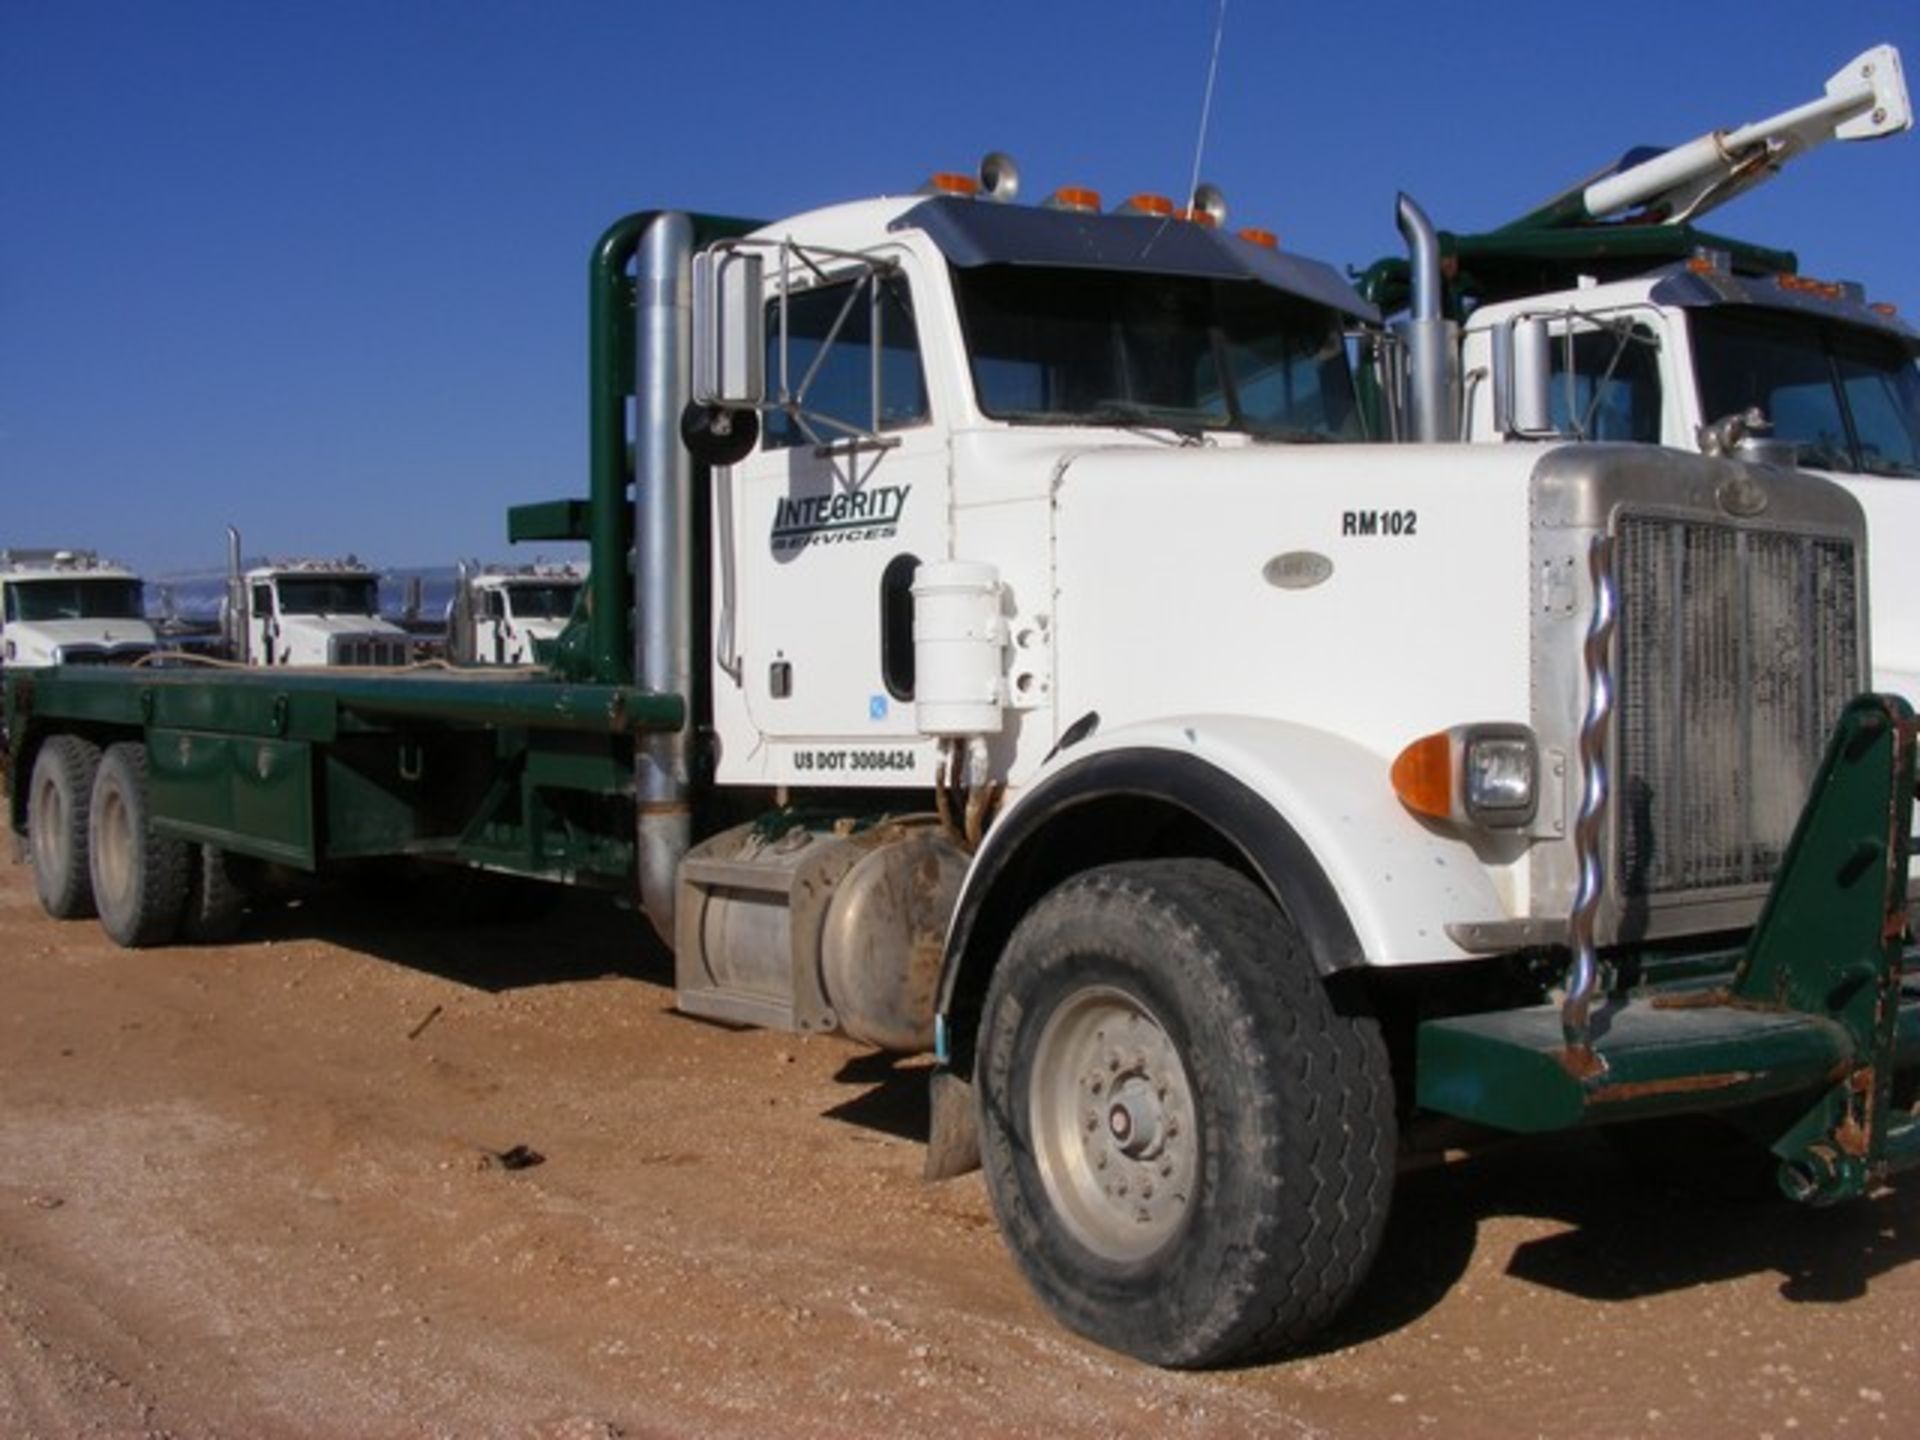 Located in YARD 1 - Midland, TX (6243) (X) 1996 PETERBILT 357 T/A GIN/ POLE TRUCK, VIN- - Image 2 of 8